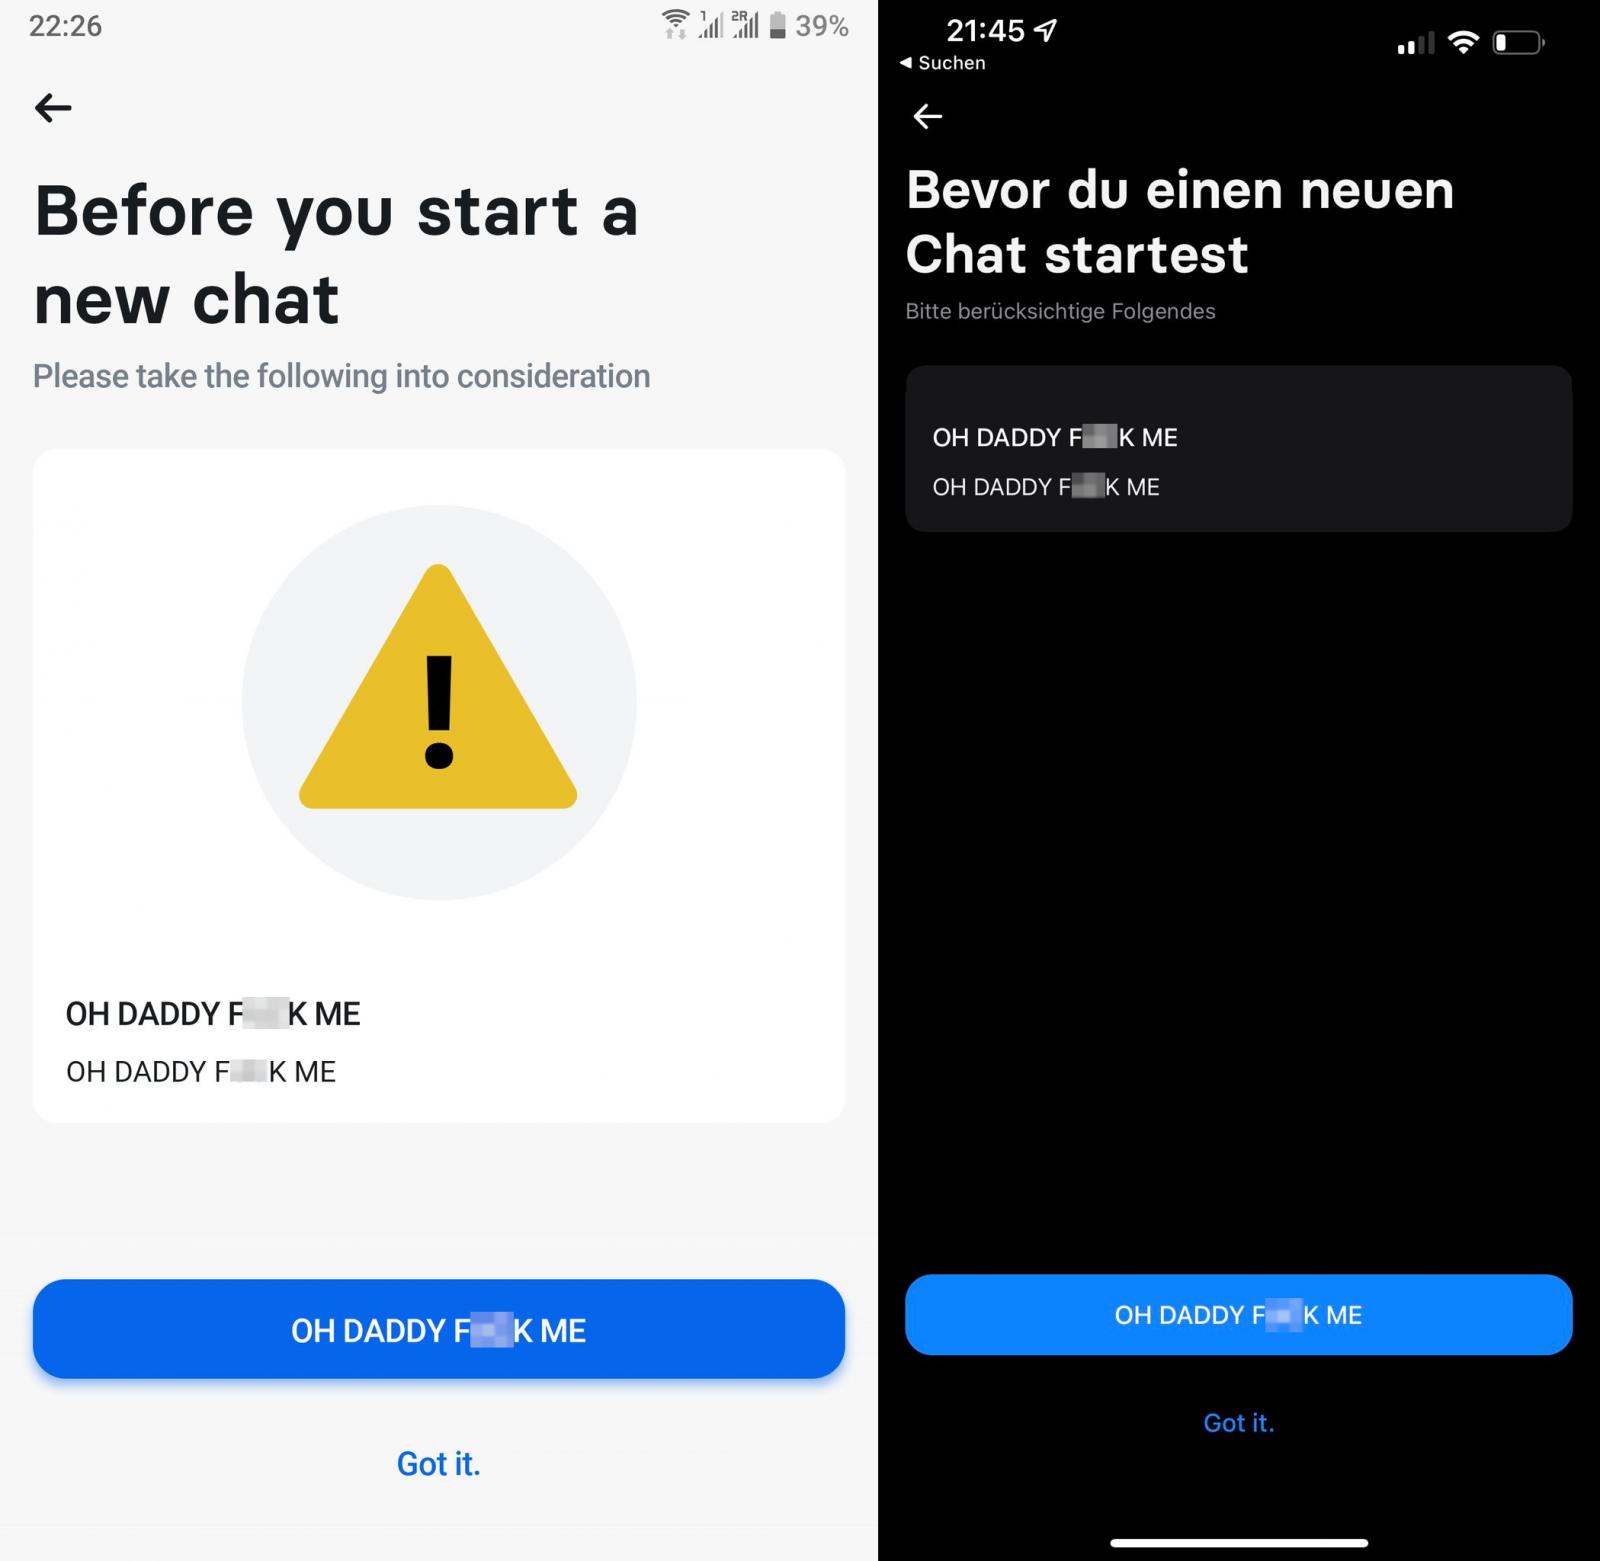 Offensive messages received by Revolut users via customer support chat